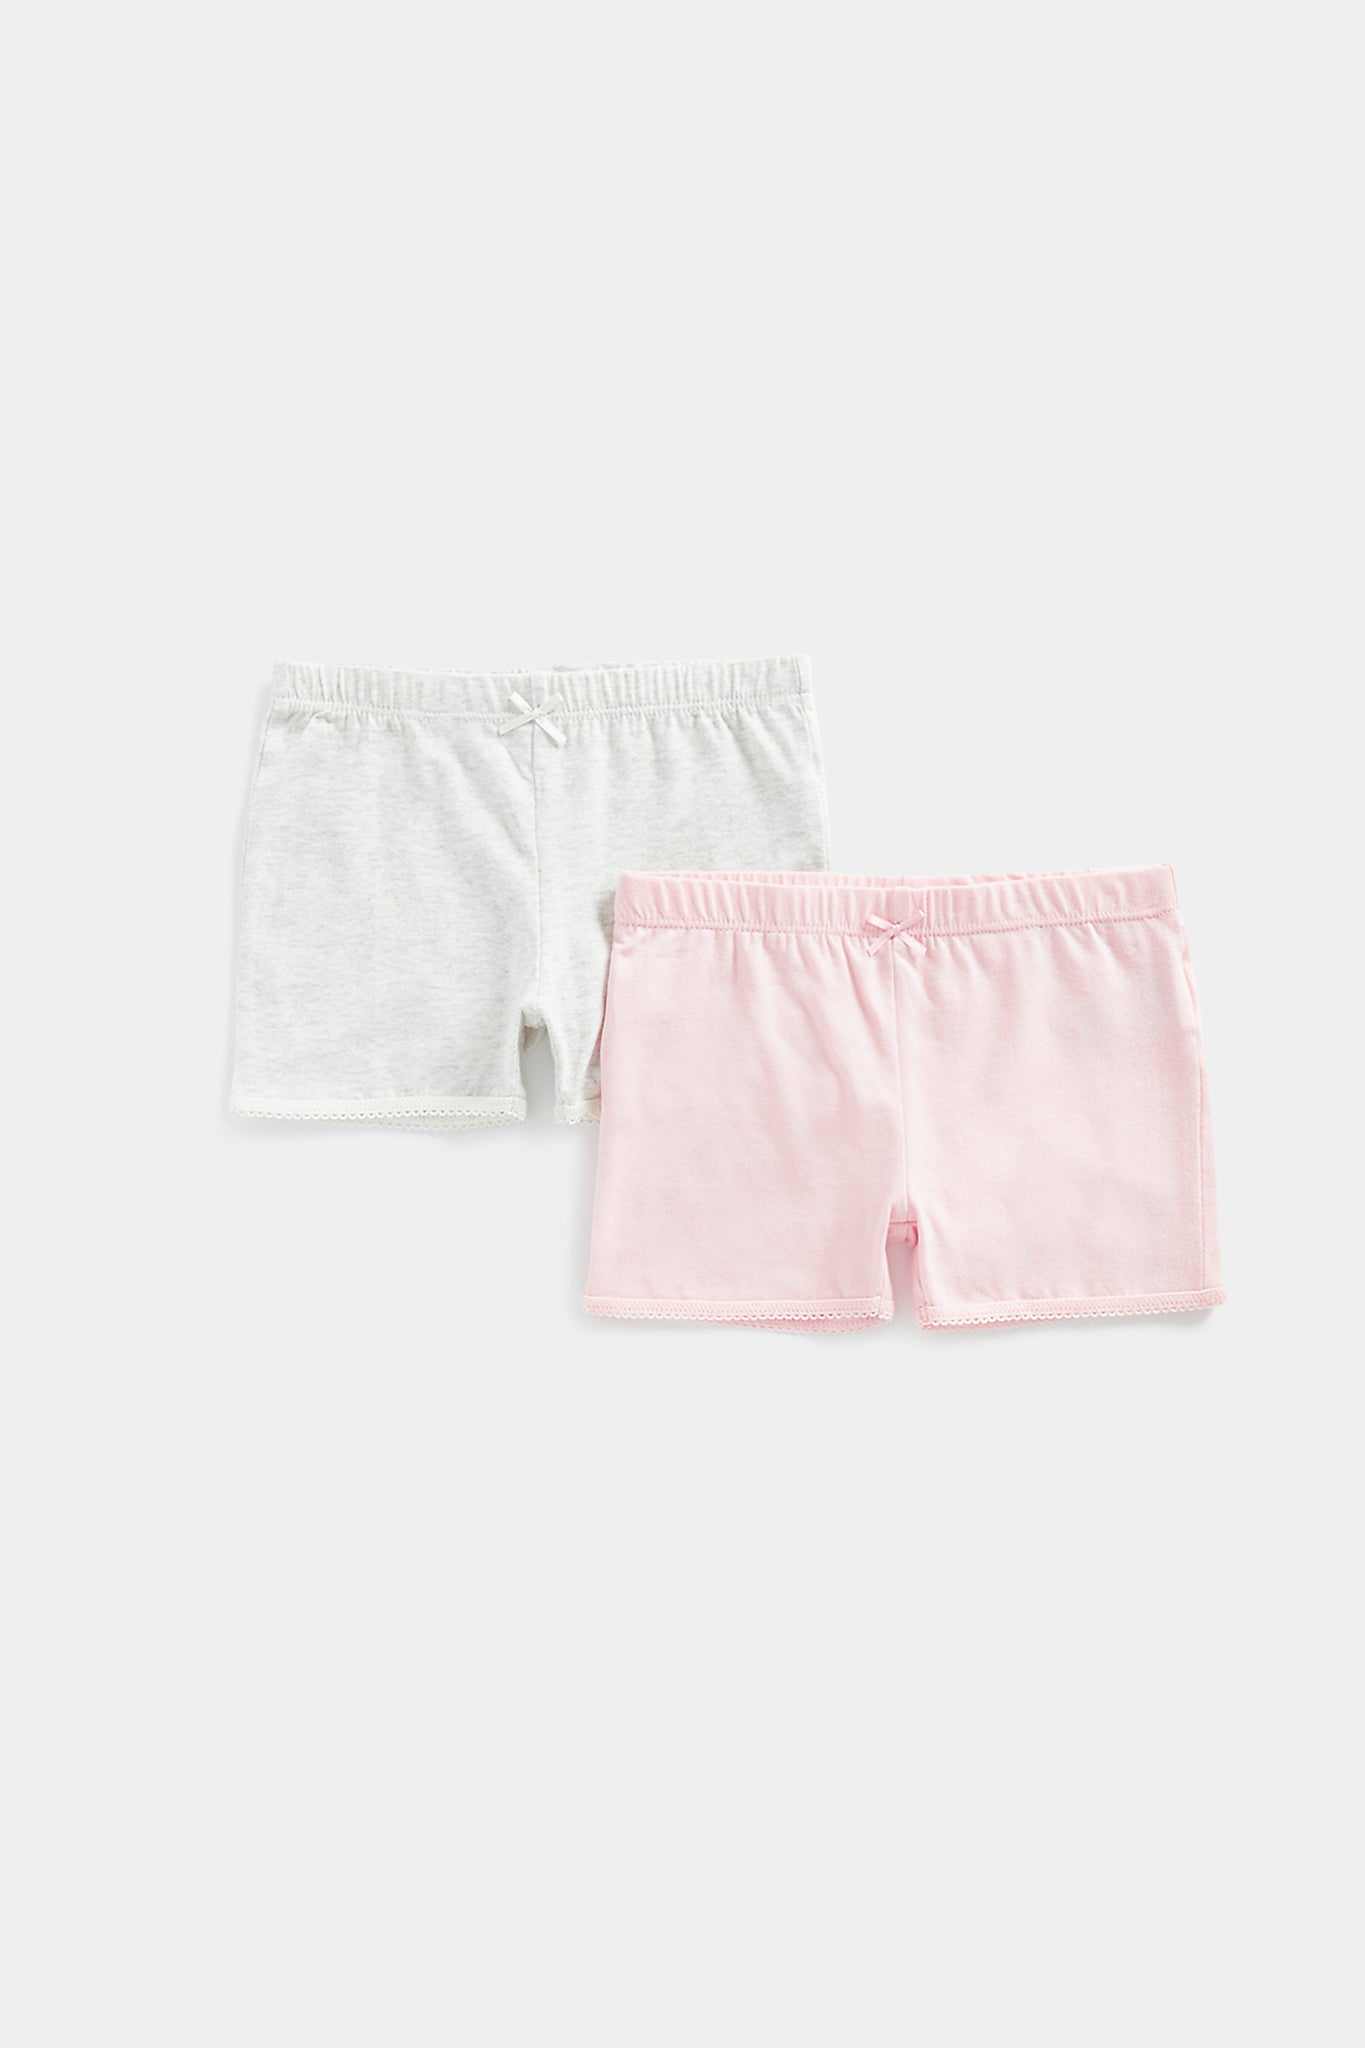 Buy Mothercare Modesty Shorts - 2 Pack Online in Malaysia